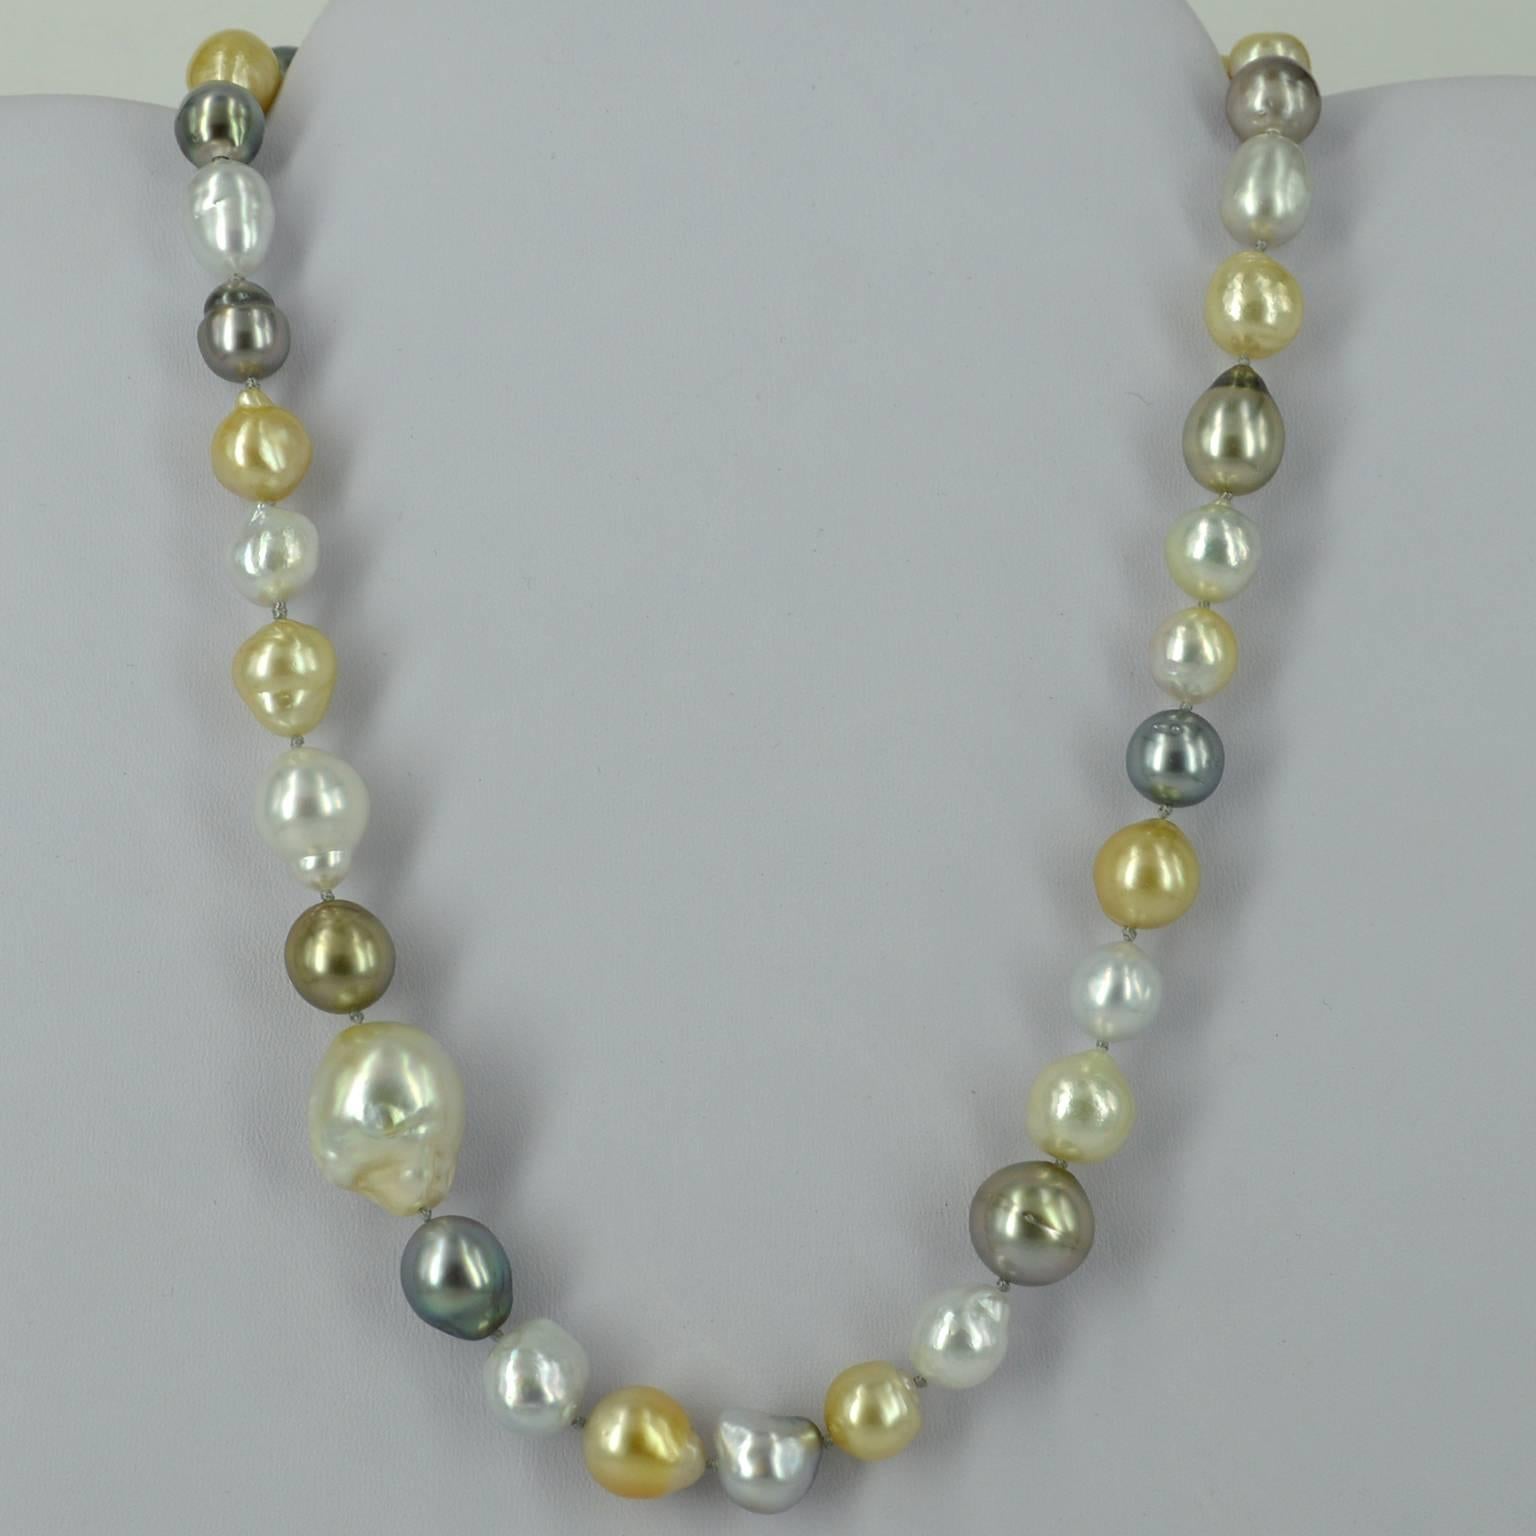 Necklace features a mix of Cream, White, Grey and Golden tone South Sea and Tahitian Pearls beautifully hand knotted on soft grey thread. Pearls range from 9.3x9.9mm to a huge feature 20x16.2mm Golden South Sea Pearl. Pearls are natural and not